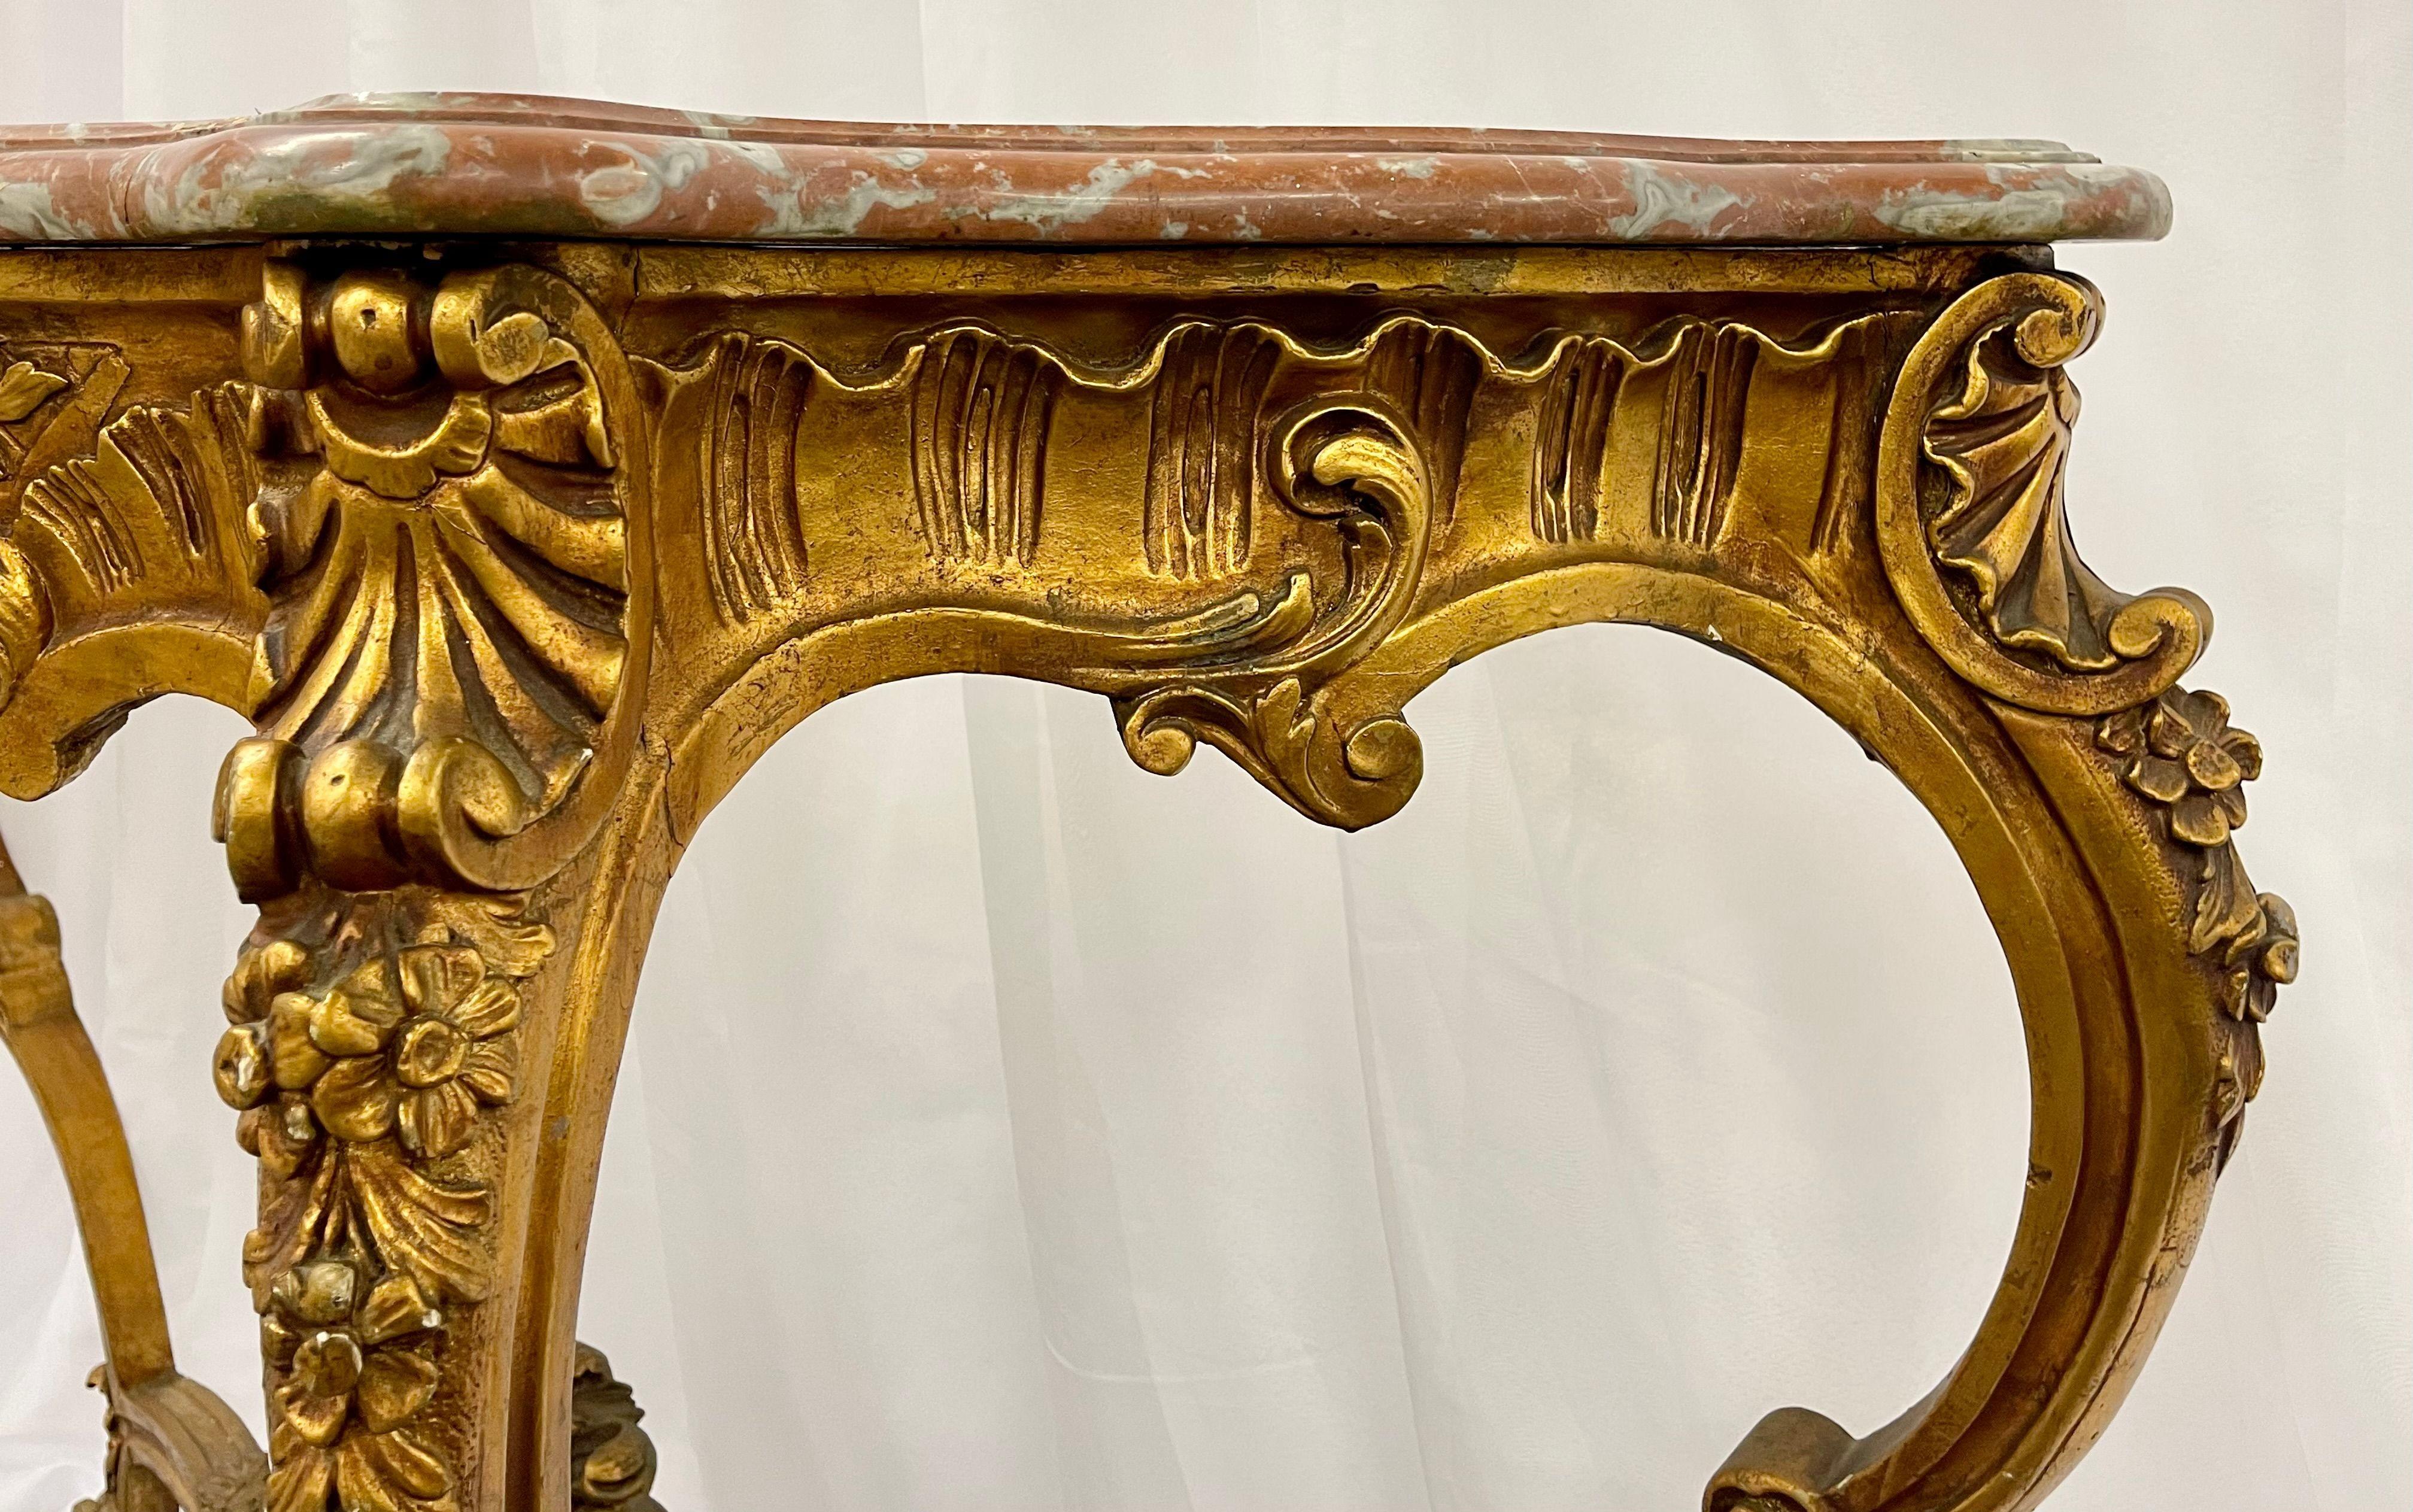 Marble-Top Louis XV Style Console Table by Jansen Exquisite Carved Details 1920s For Sale 3